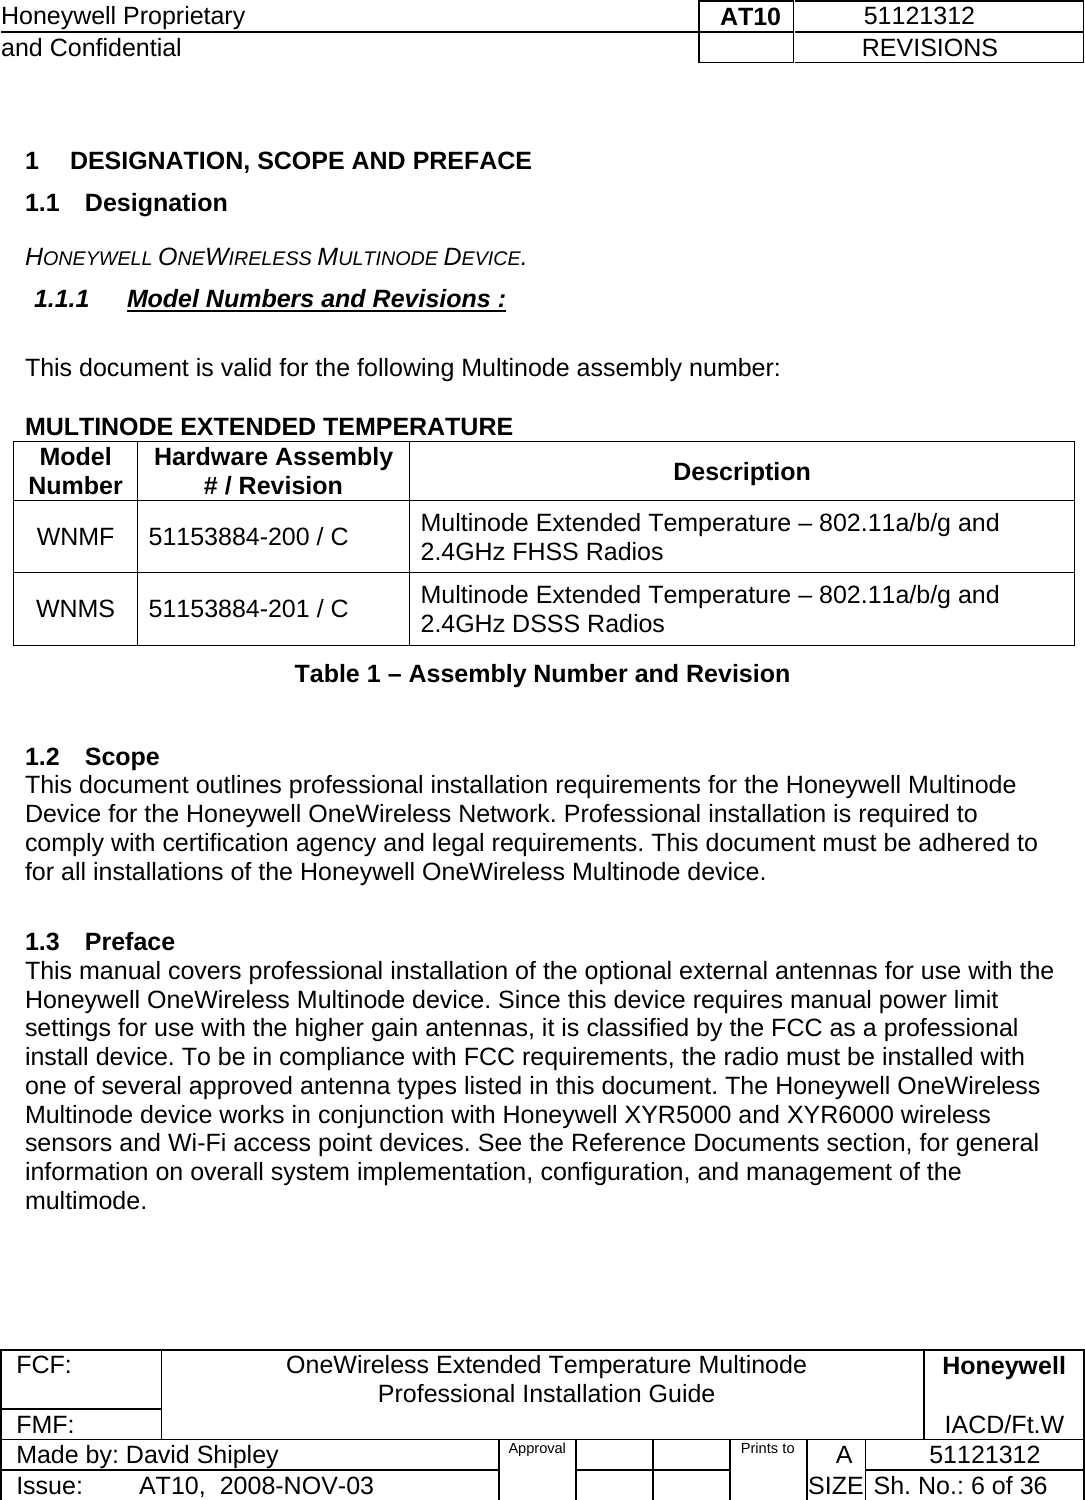 Honeywell Proprietary    AT10           51121312 and Confidential             REVISIONS  FCF: OneWireless Extended Temperature Multinode  Professional Installation Guide  Honeywell FMF:               IACD/Ft.W Made by: David Shipley  Approval   Prints to     A           51121312 Issue:        AT10,  2008-NOV-03          SIZE  Sh. No.: 6 of 36   1  DESIGNATION, SCOPE AND PREFACE 1.1 Designation HONEYWELL ONEWIRELESS MULTINODE DEVICE.  1.1.1  Model Numbers and Revisions :   This document is valid for the following Multinode assembly number:    MULTINODE EXTENDED TEMPERATURE Model Number  Hardware Assembly # / Revision  Description WNMF  51153884-200 / C  Multinode Extended Temperature – 802.11a/b/g and 2.4GHz FHSS Radios WNMS  51153884-201 / C  Multinode Extended Temperature – 802.11a/b/g and 2.4GHz DSSS Radios Table 1 – Assembly Number and Revision   1.2 Scope This document outlines professional installation requirements for the Honeywell Multinode Device for the Honeywell OneWireless Network. Professional installation is required to comply with certification agency and legal requirements. This document must be adhered to for all installations of the Honeywell OneWireless Multinode device.   1.3 Preface This manual covers professional installation of the optional external antennas for use with the Honeywell OneWireless Multinode device. Since this device requires manual power limit settings for use with the higher gain antennas, it is classified by the FCC as a professional install device. To be in compliance with FCC requirements, the radio must be installed with one of several approved antenna types listed in this document. The Honeywell OneWireless Multinode device works in conjunction with Honeywell XYR5000 and XYR6000 wireless sensors and Wi-Fi access point devices. See the Reference Documents section, for general information on overall system implementation, configuration, and management of the multimode.   